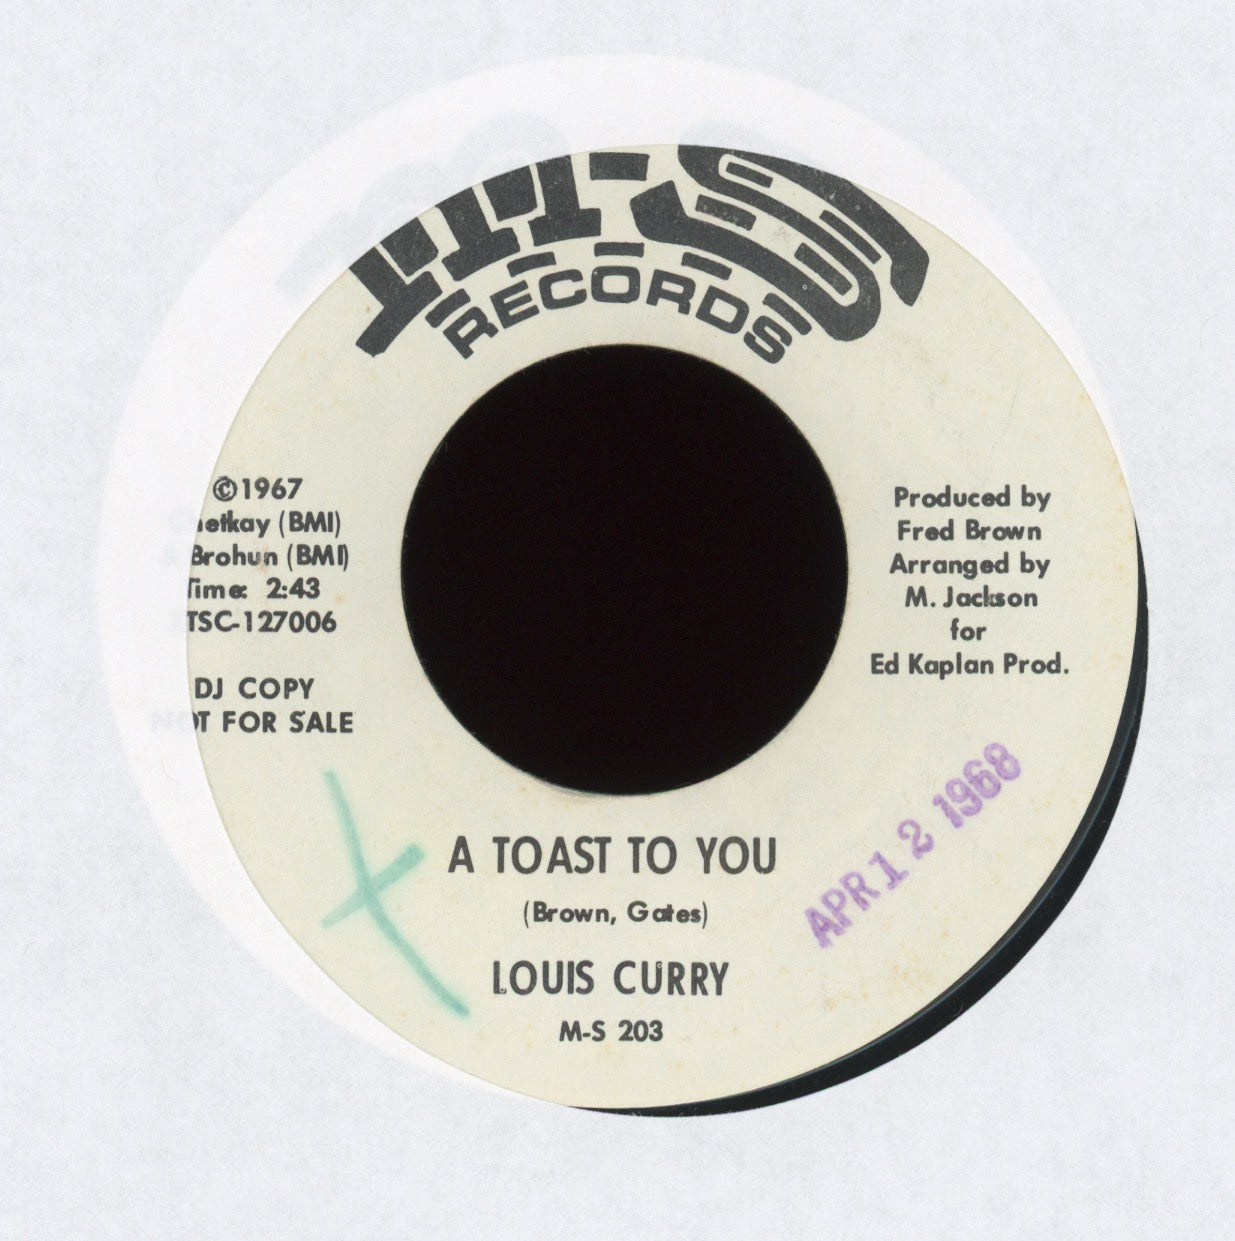 Louis Curry - I'll Try Again Tomorrow on M-S Promo Northern Soul 45